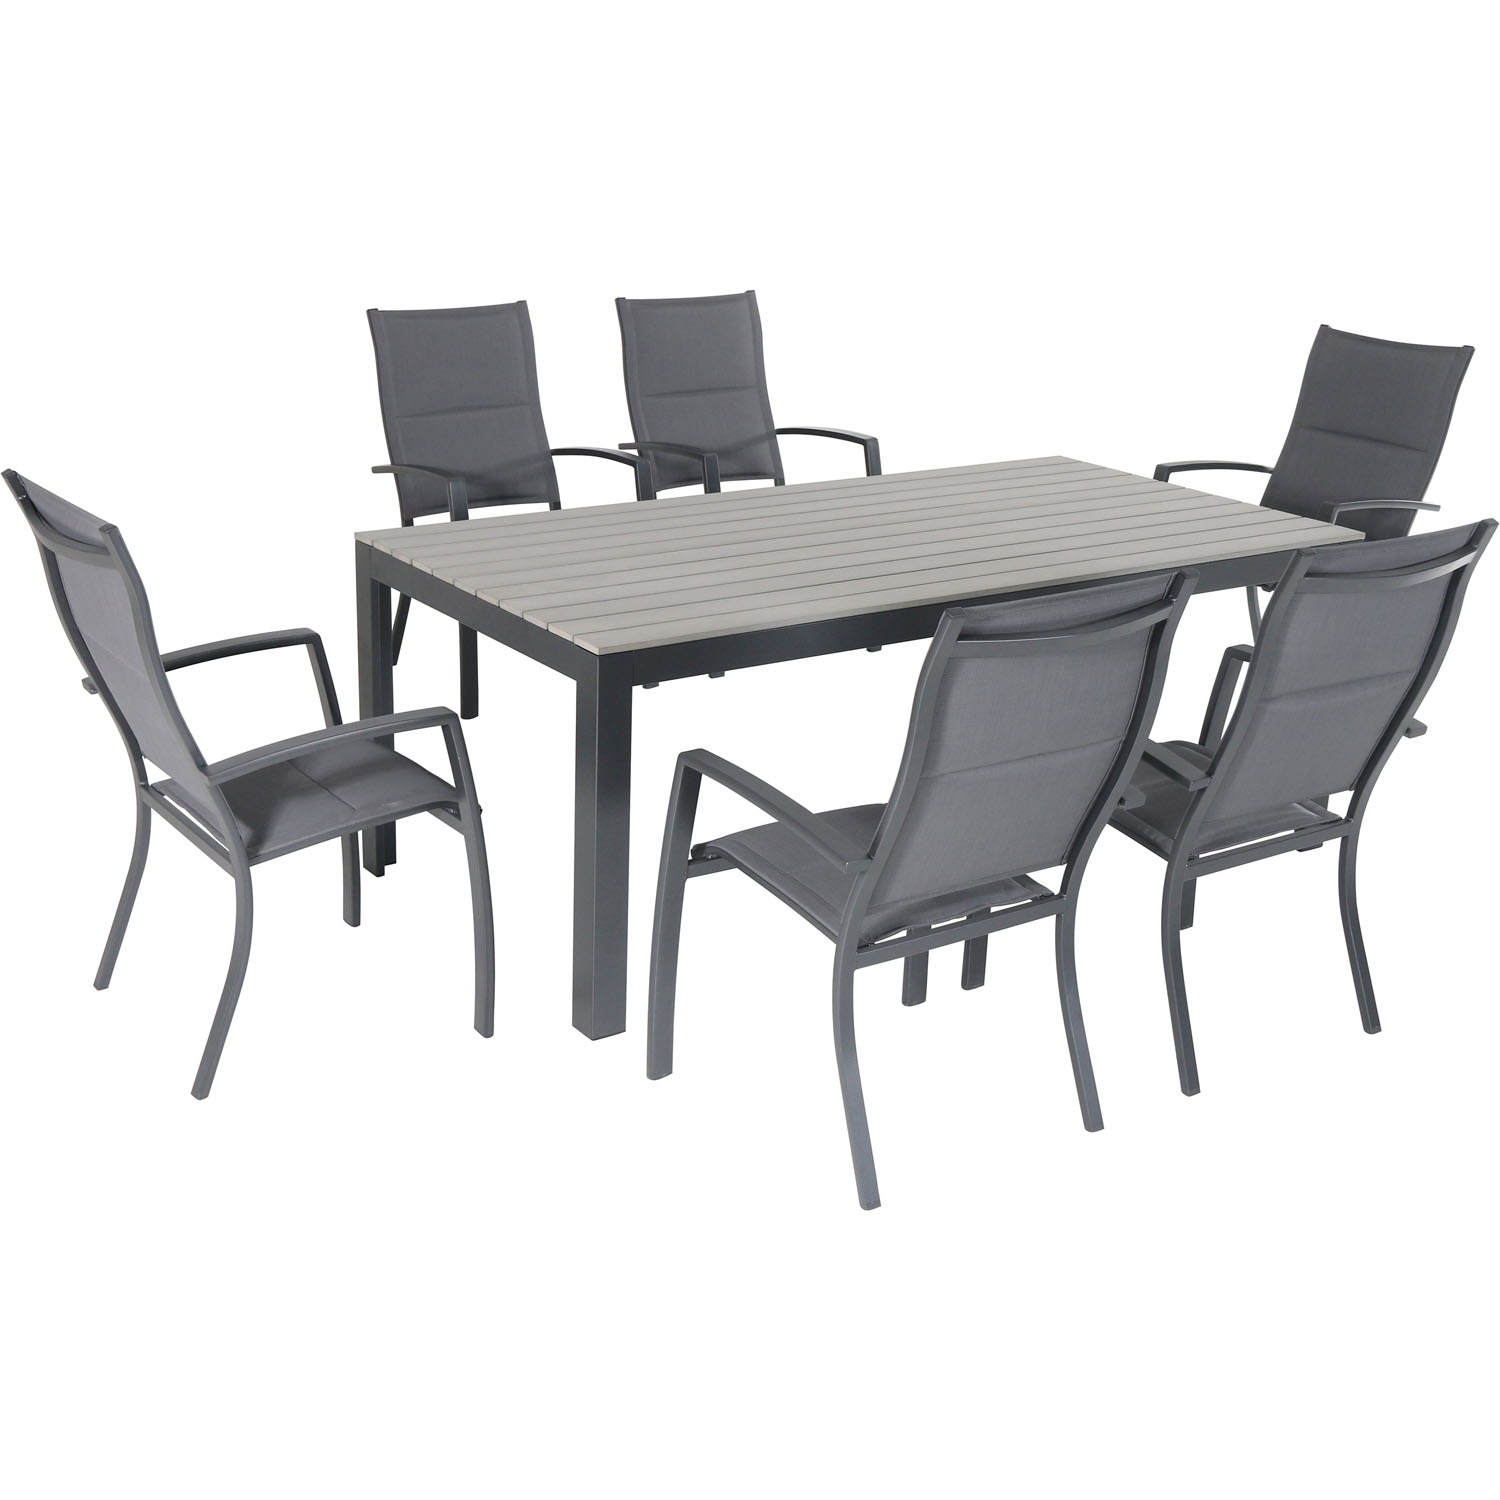 Cambridge Mesa 7-Piece Dining Set with 6 Padded Sling Chairs and a Faux Wood Dining Table - image 1 of 8